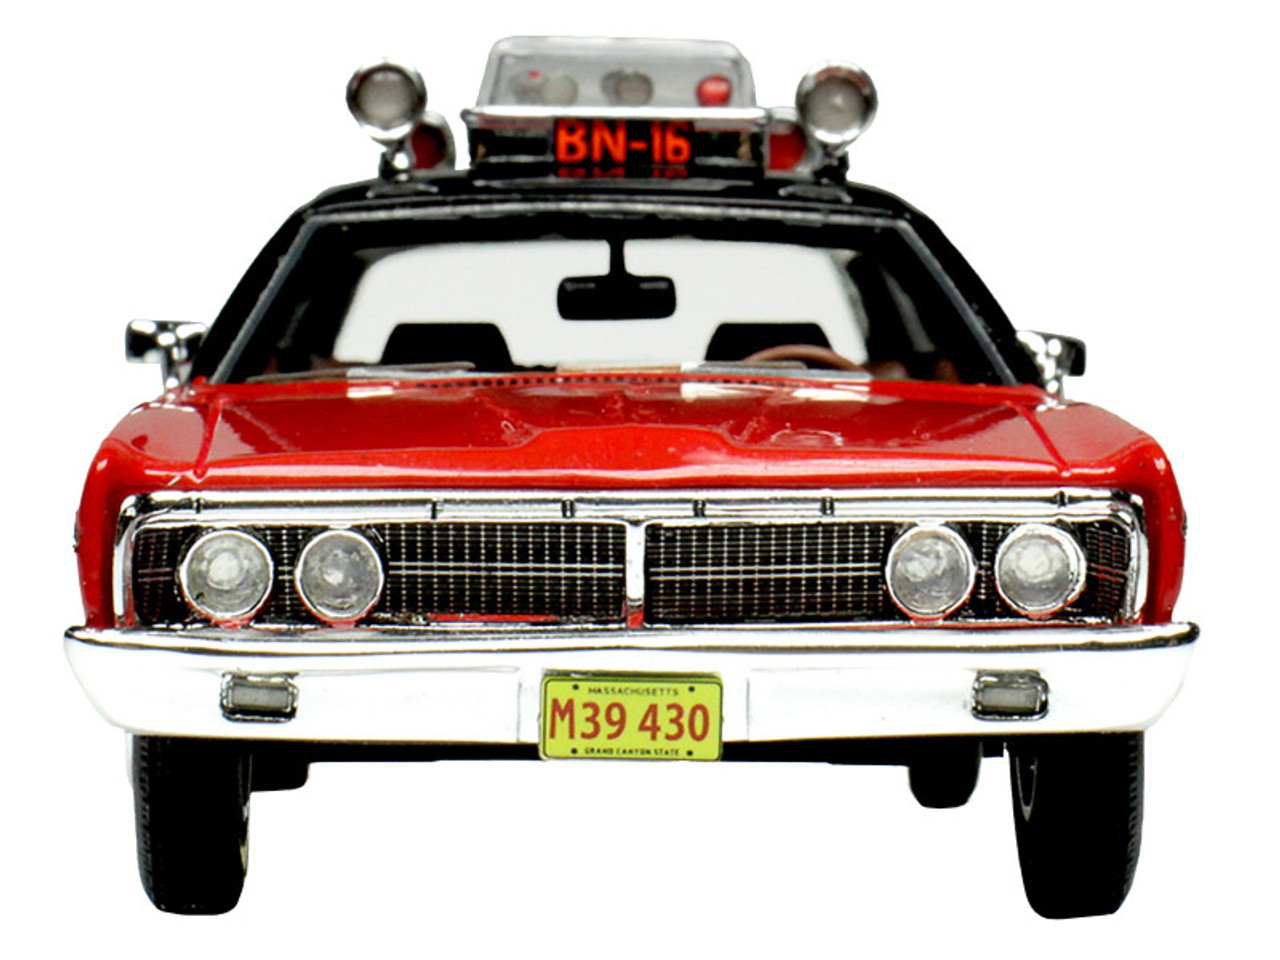 1970 Ford Galaxie Station Wagon Red with Black Top "Chicago Fire Department Fire Chief" Limited Edition to 180 pieces Worldwide 1/43 Model Car by Goldvarg Collection